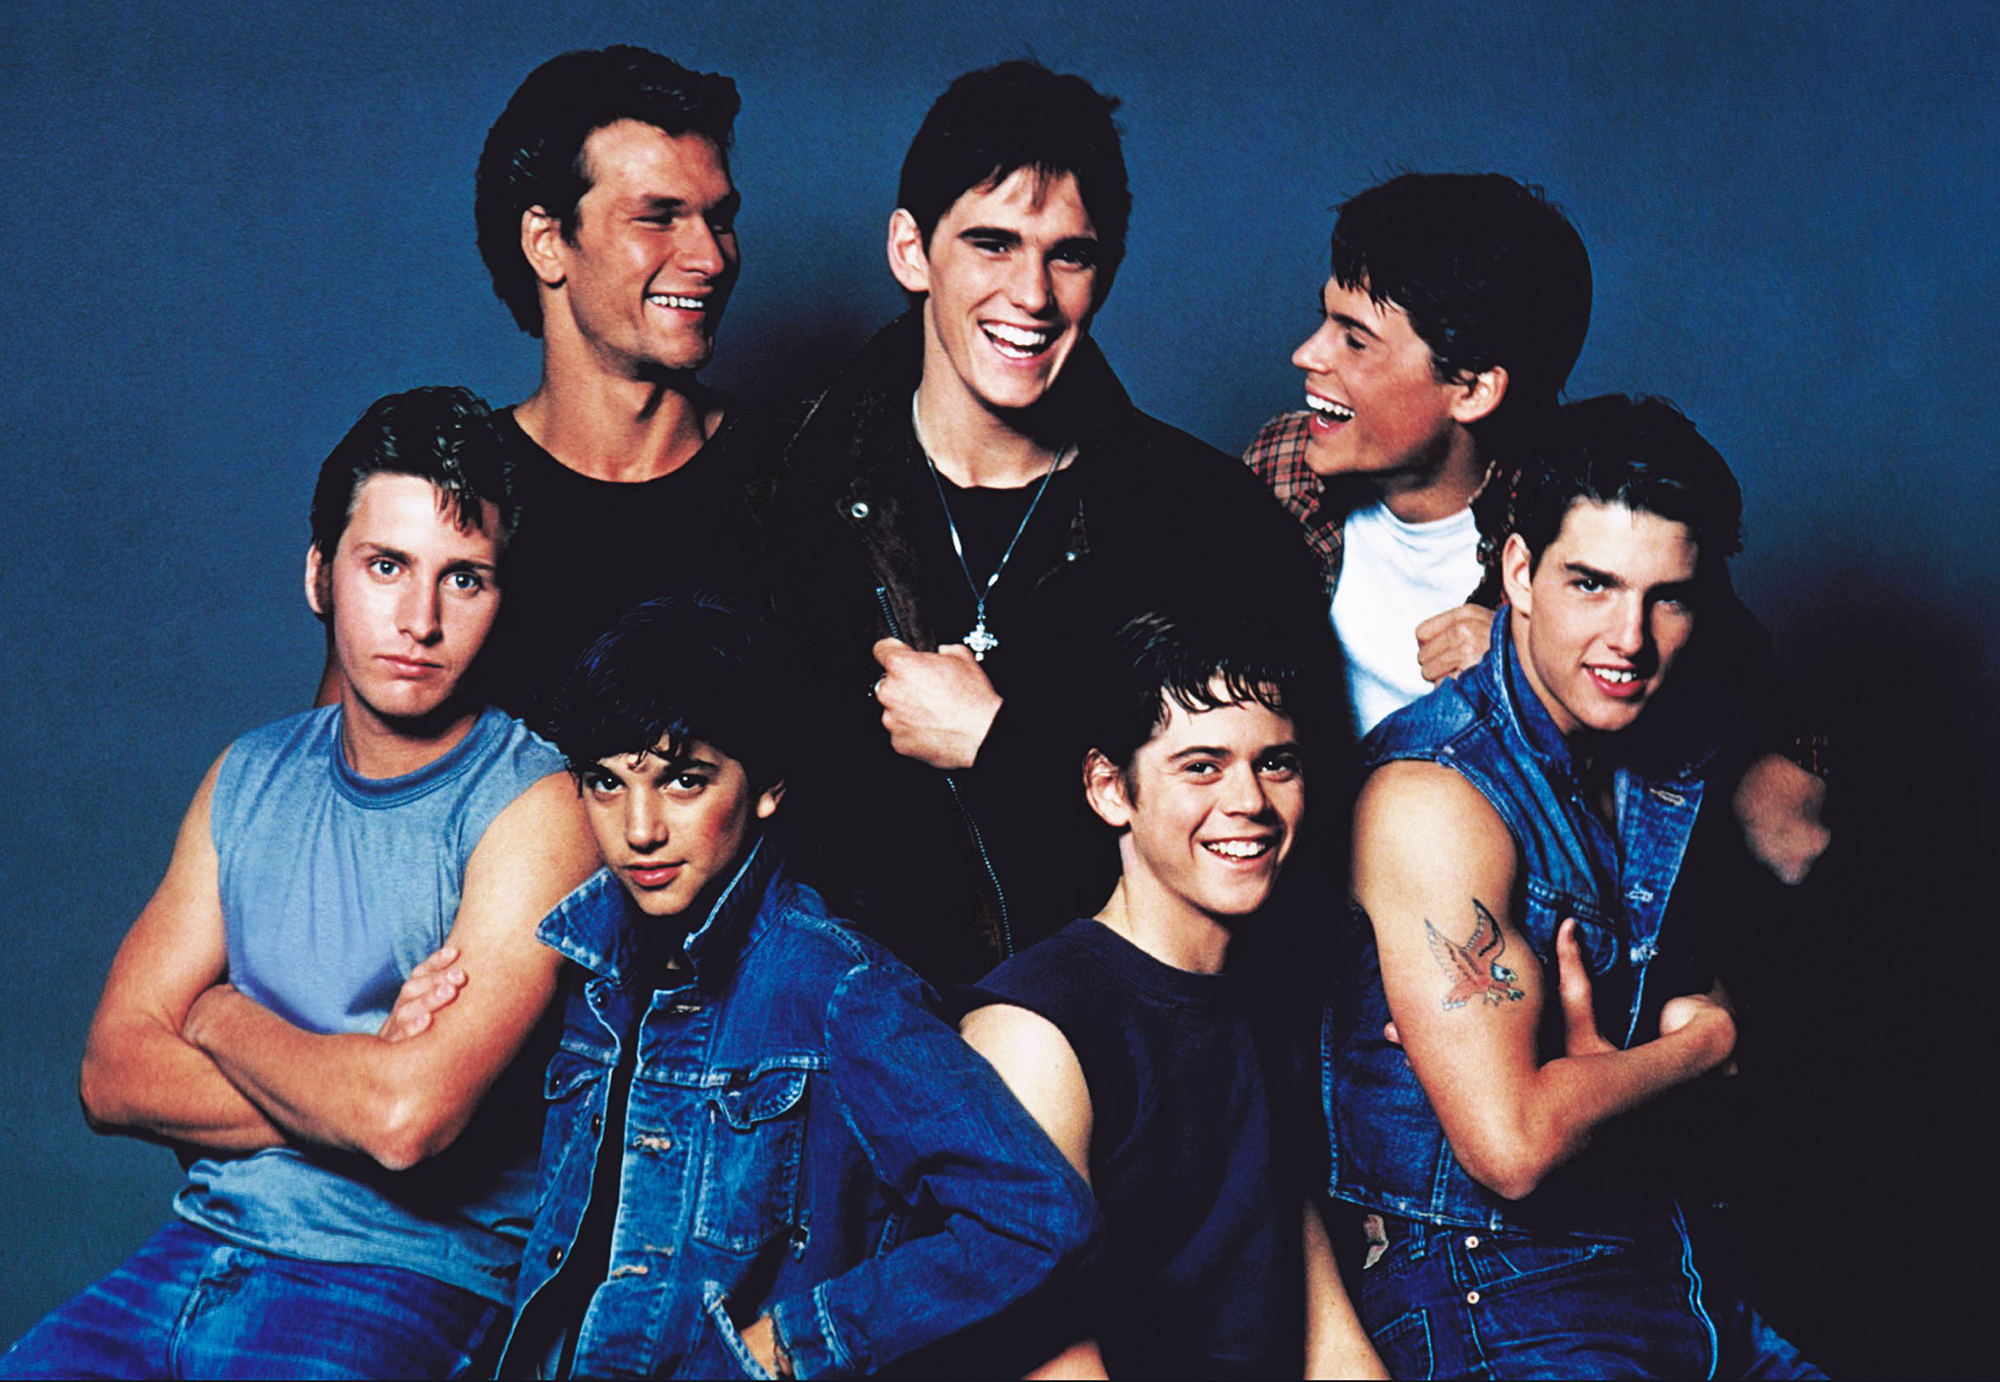 The-Outsiders-Cast-Where-Are-They-Now-Feature.jpg?quality=80&strip=all